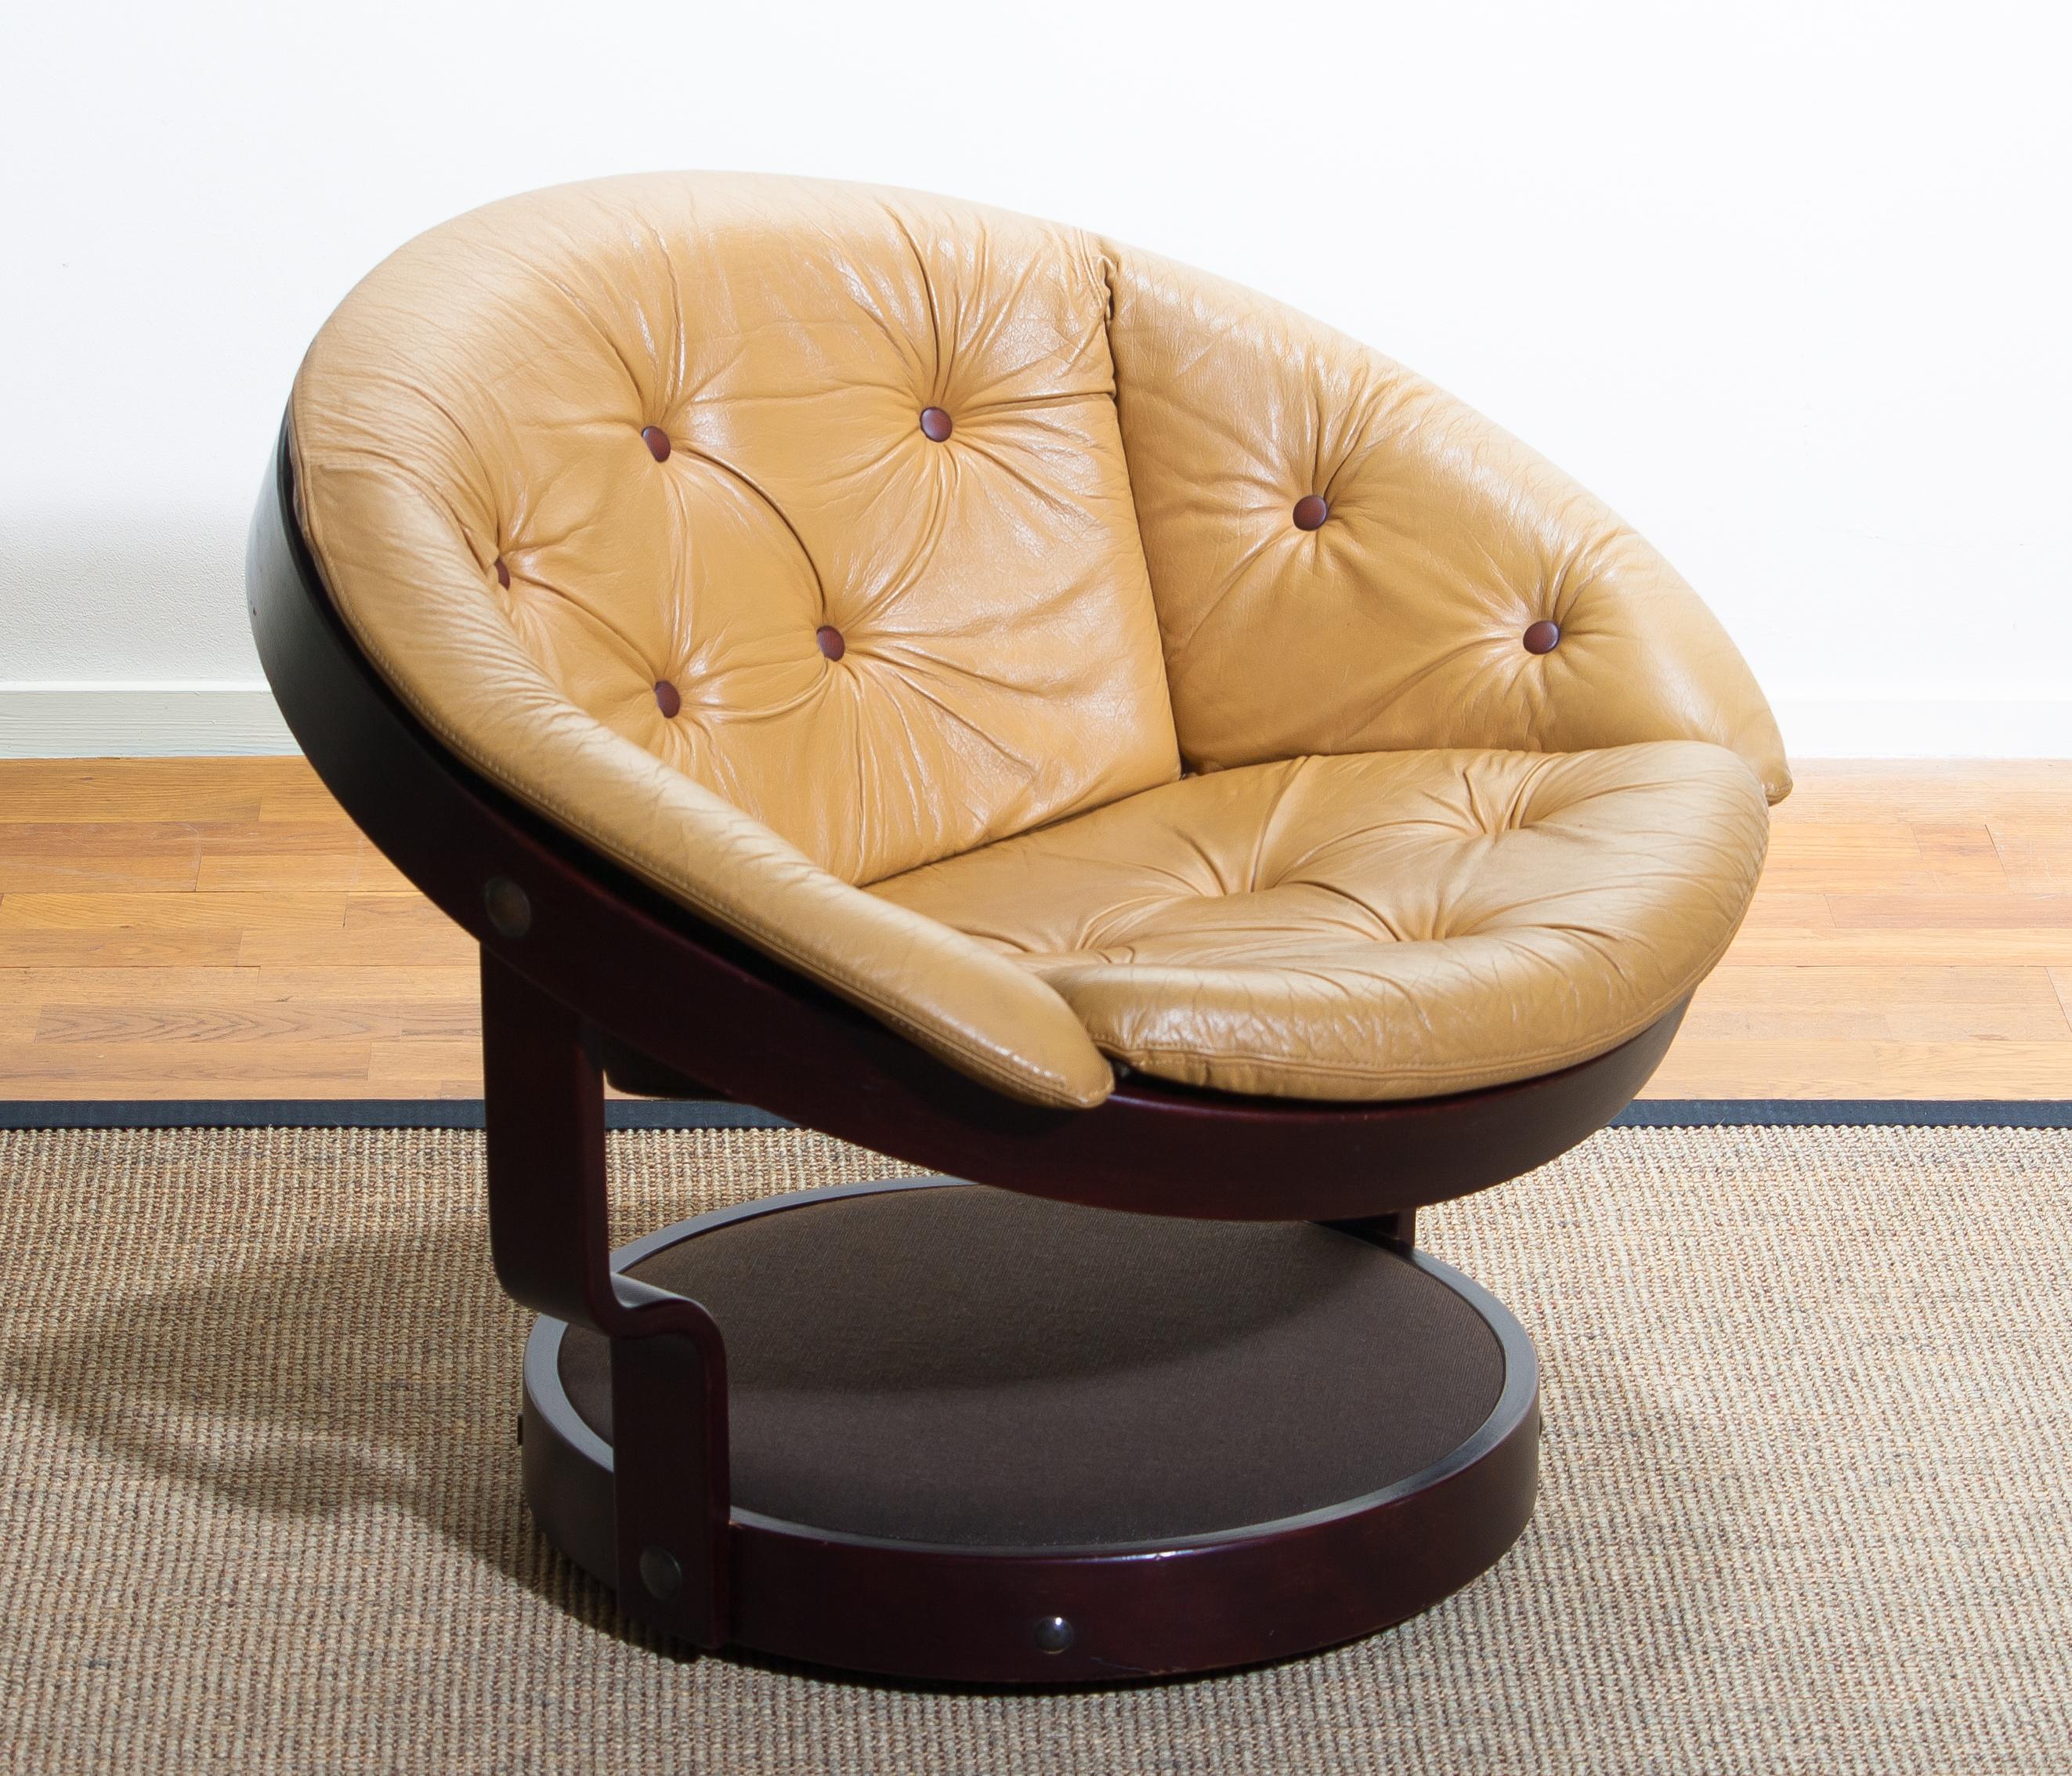 Late 20th Century 1970s Scandinavian Circle Shaped Swivel Chair by Oddmund Vad in Camel Leather